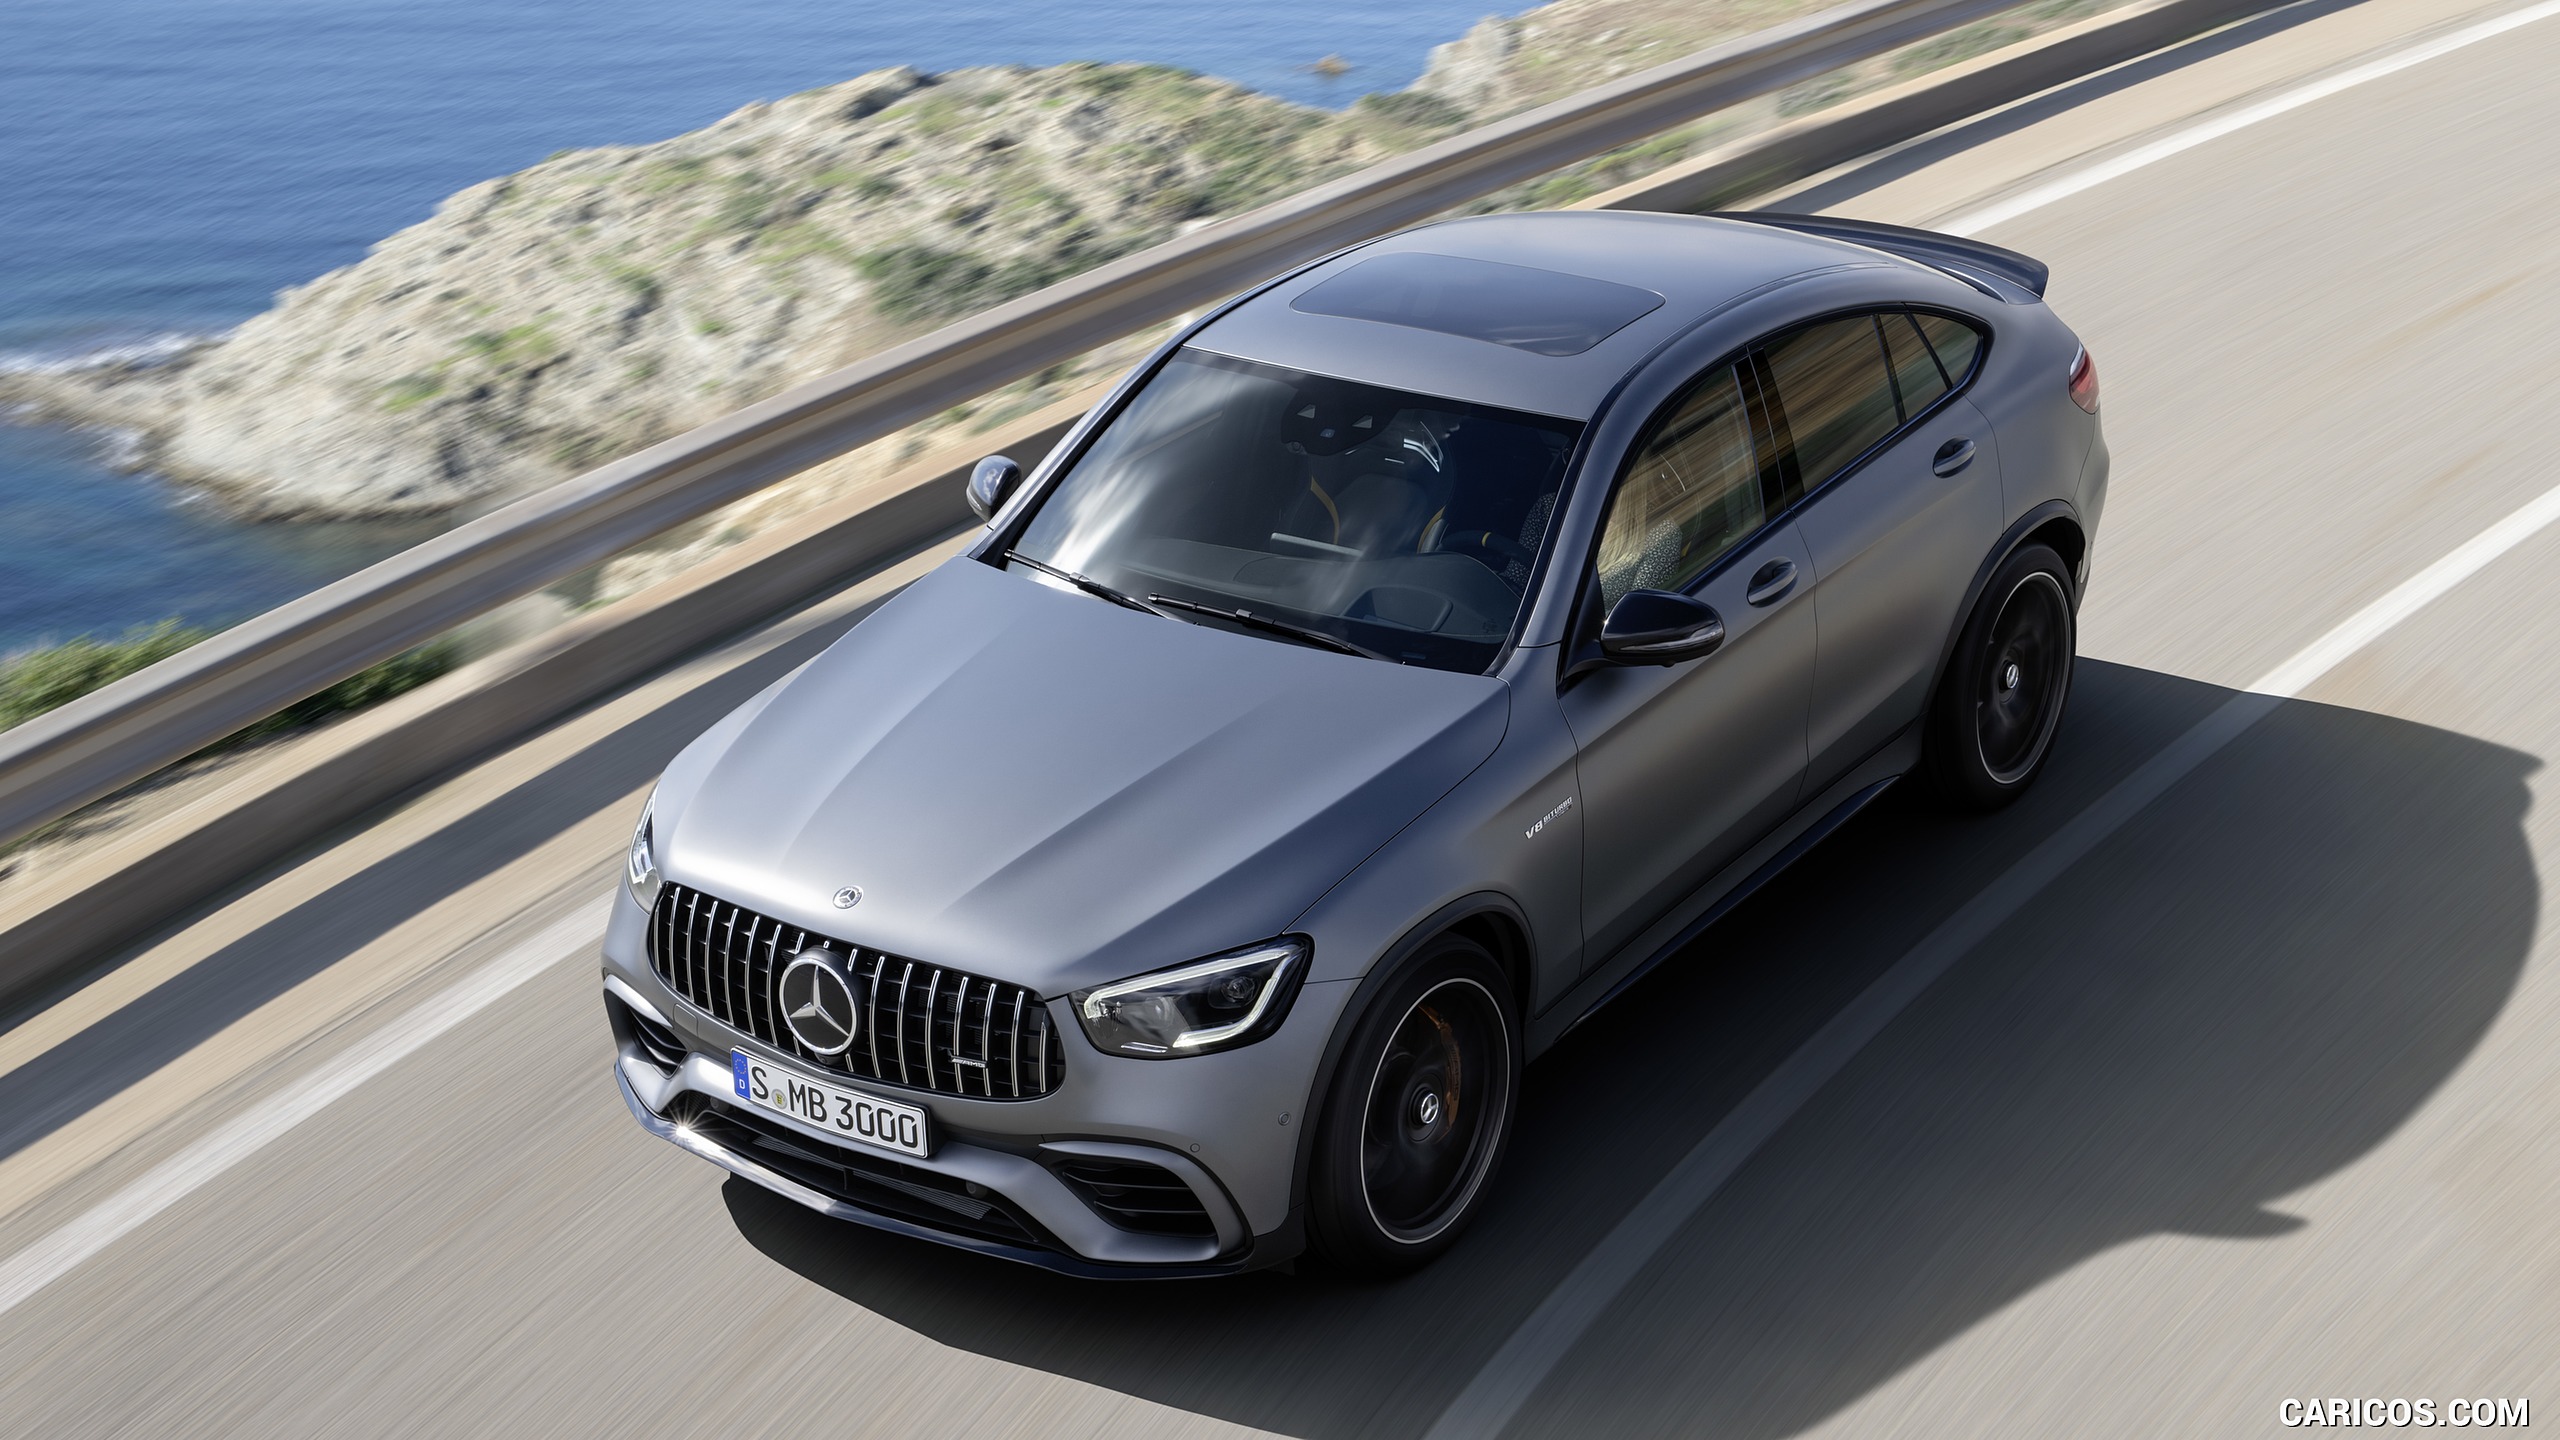 2020 Mercedes-AMG GLC 63 S 4MATIC+ Coupe - Top, #4 of 102